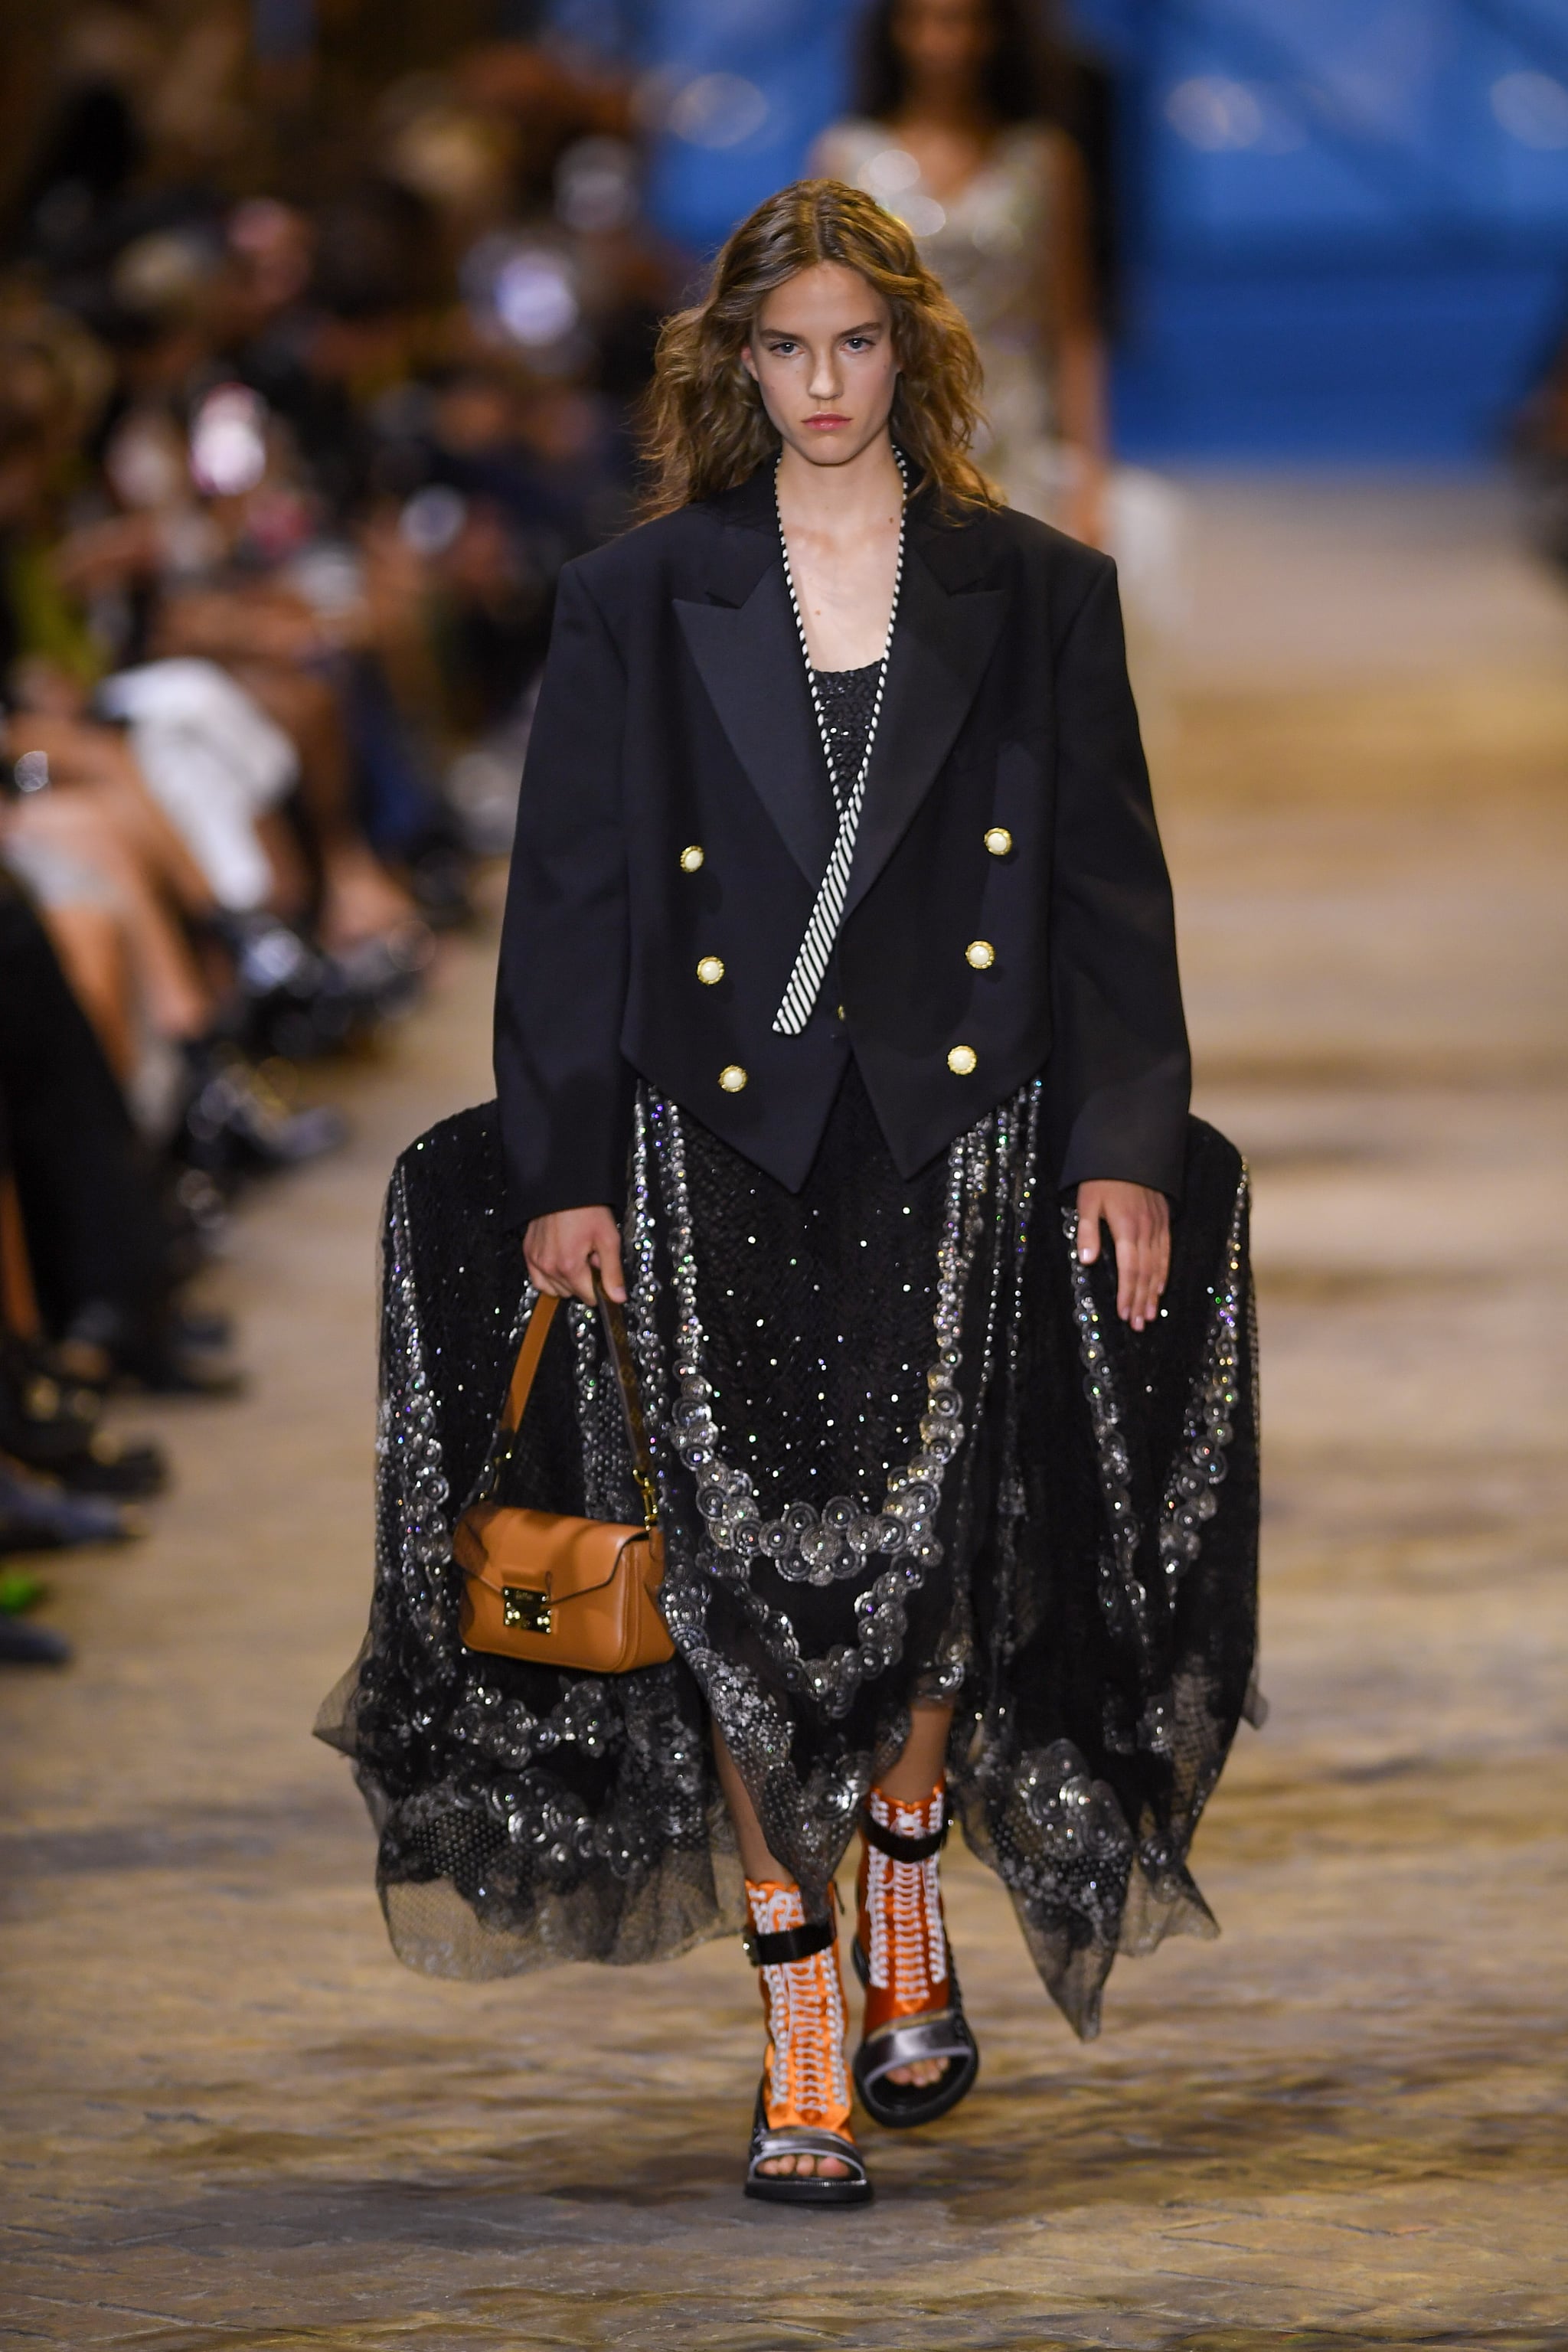 Vuitton Spring 2022 Look 4 | 23 Things to Know About Vuitton's Over-the-Top Spring 2022 Show | POPSUGAR Fashion Photo 4